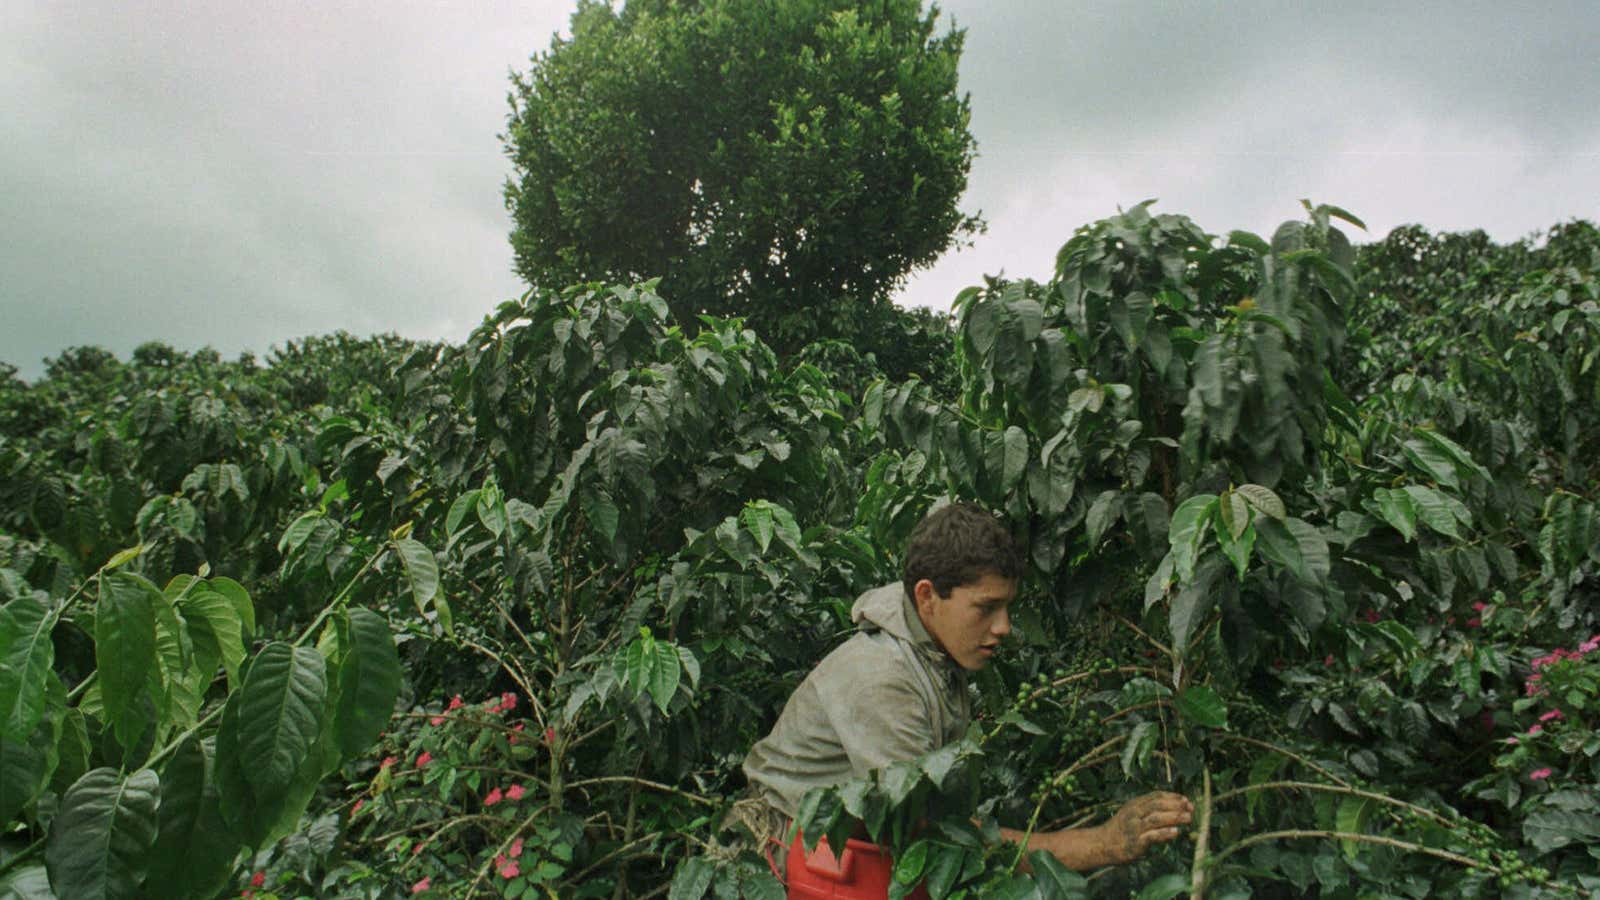 Picking coffee beans in La Morelia, Colombia, before the strike.